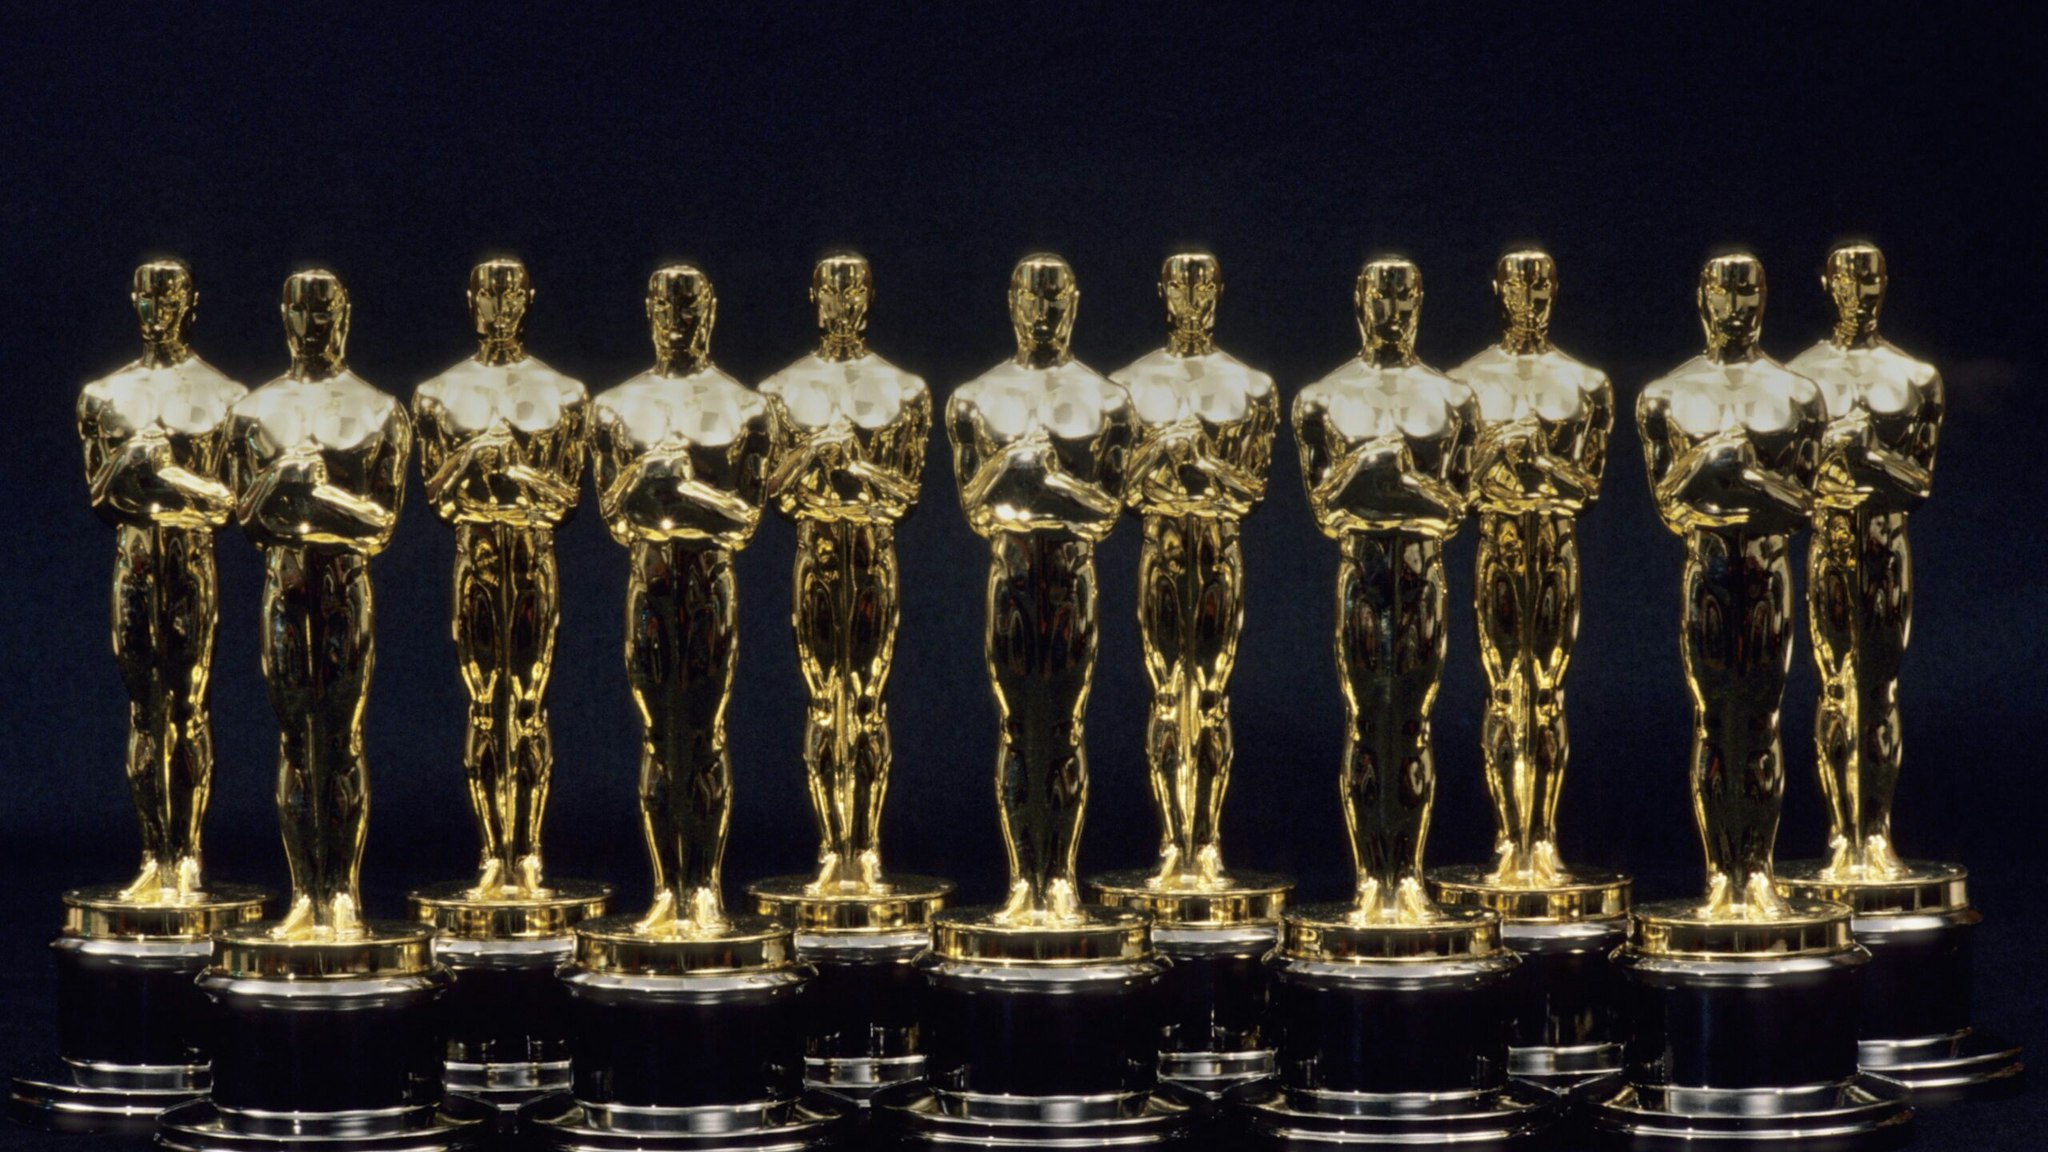 A view of 11 Oscars statues lined up next to each other in 1990 in Los Angeles, California.